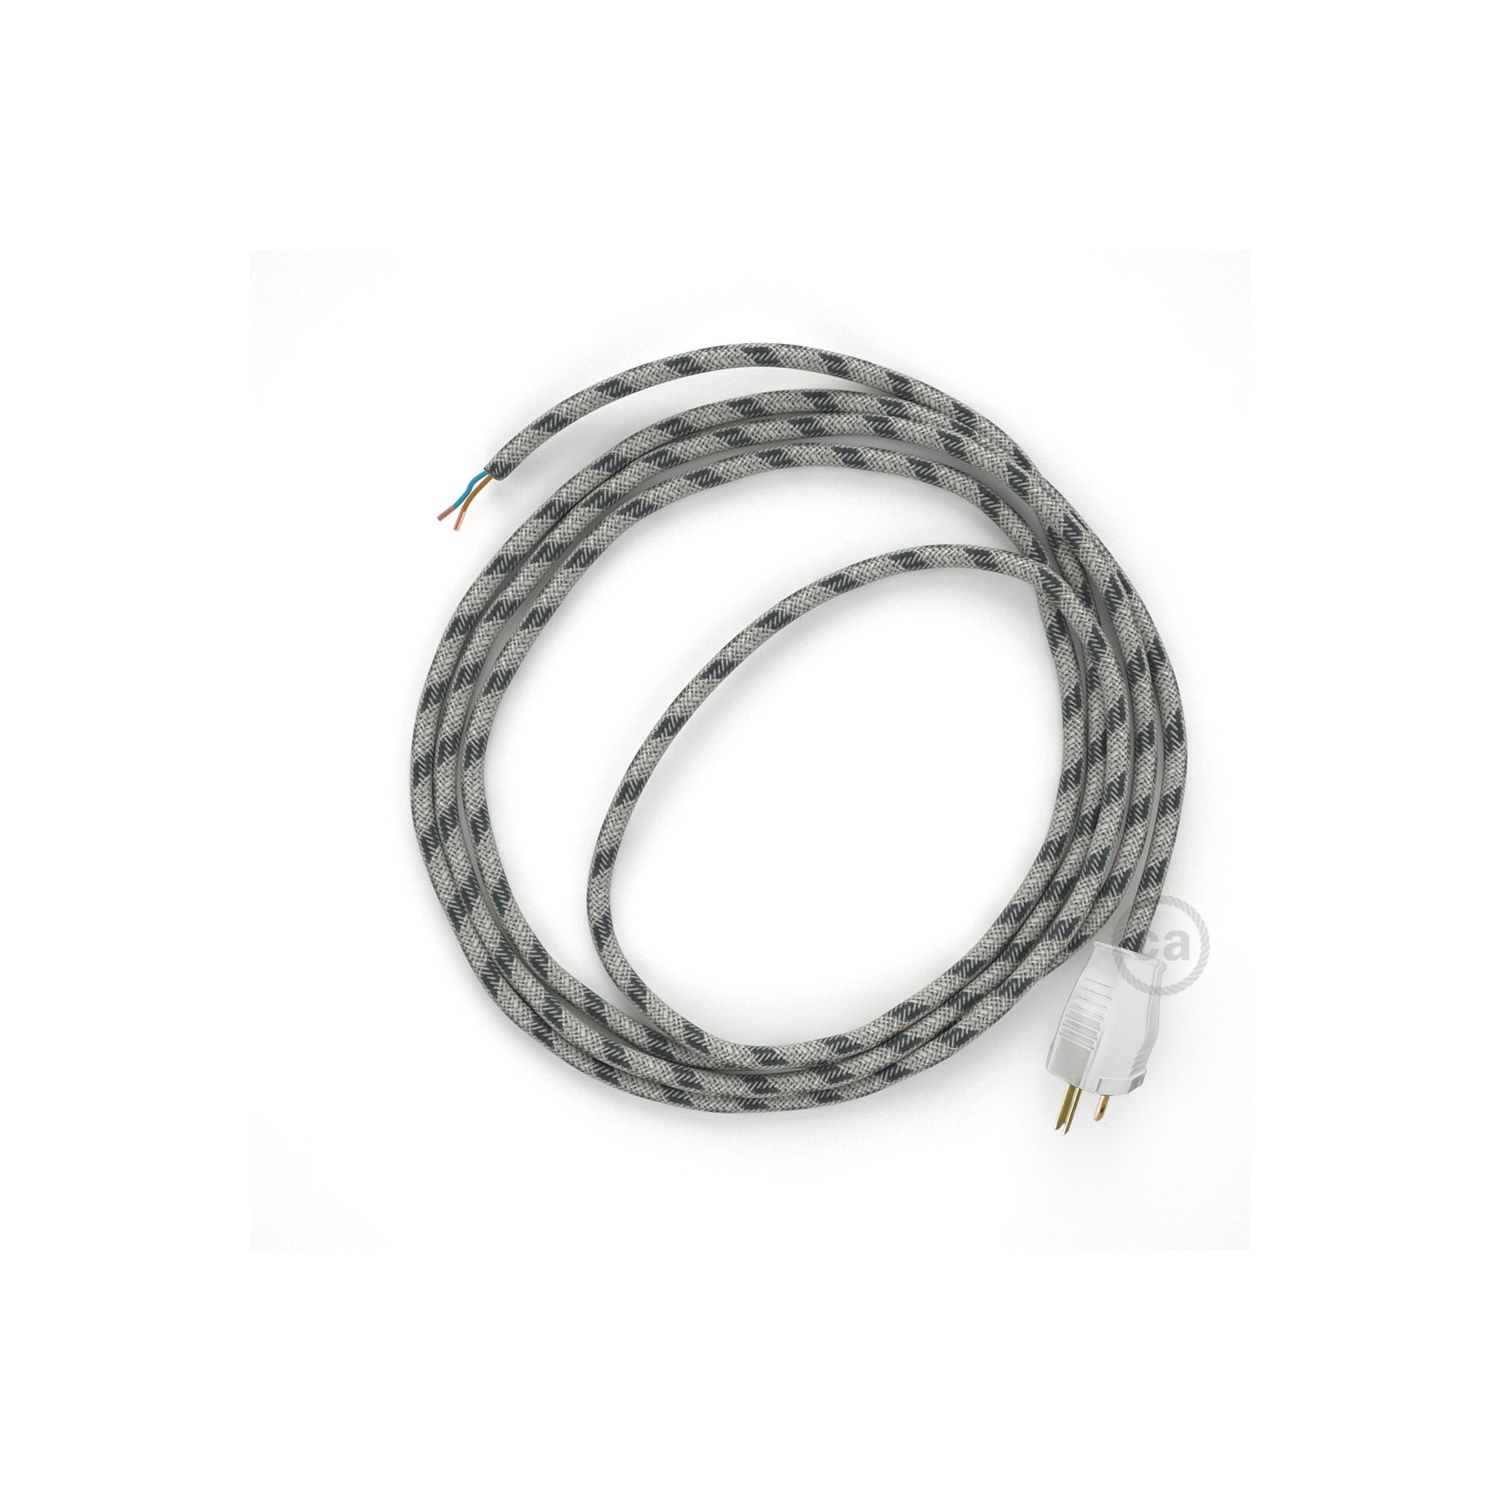 Cord-set - RD54 Natural & Charcoal Linen Stripe Covered Round Cable